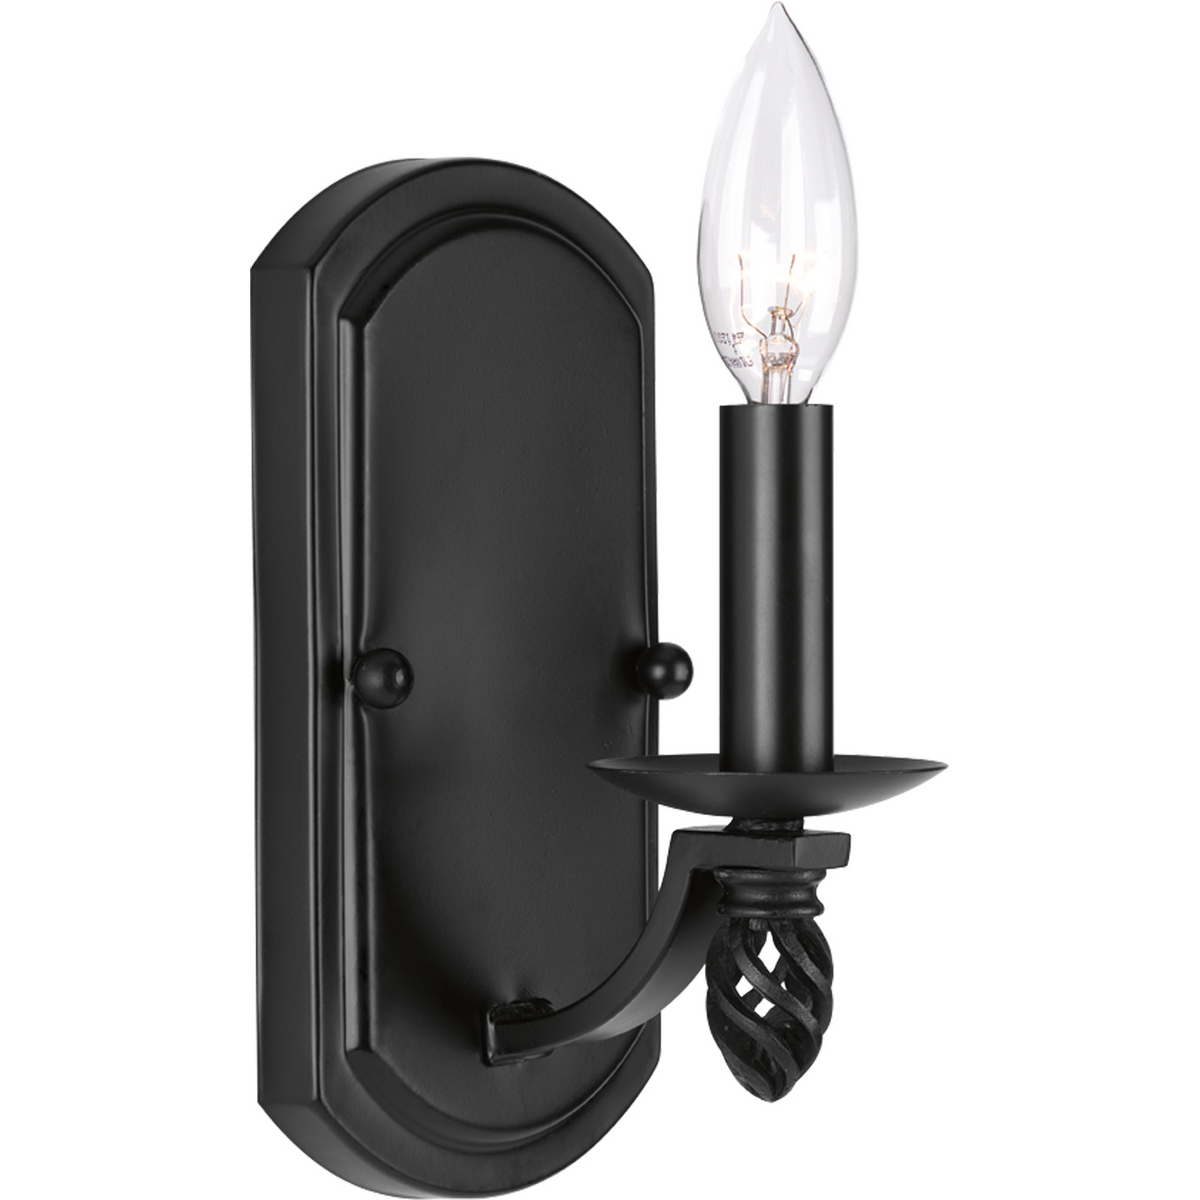 A black iron frame with twist elements takes center stage in this Greyson one-light wall sconce.